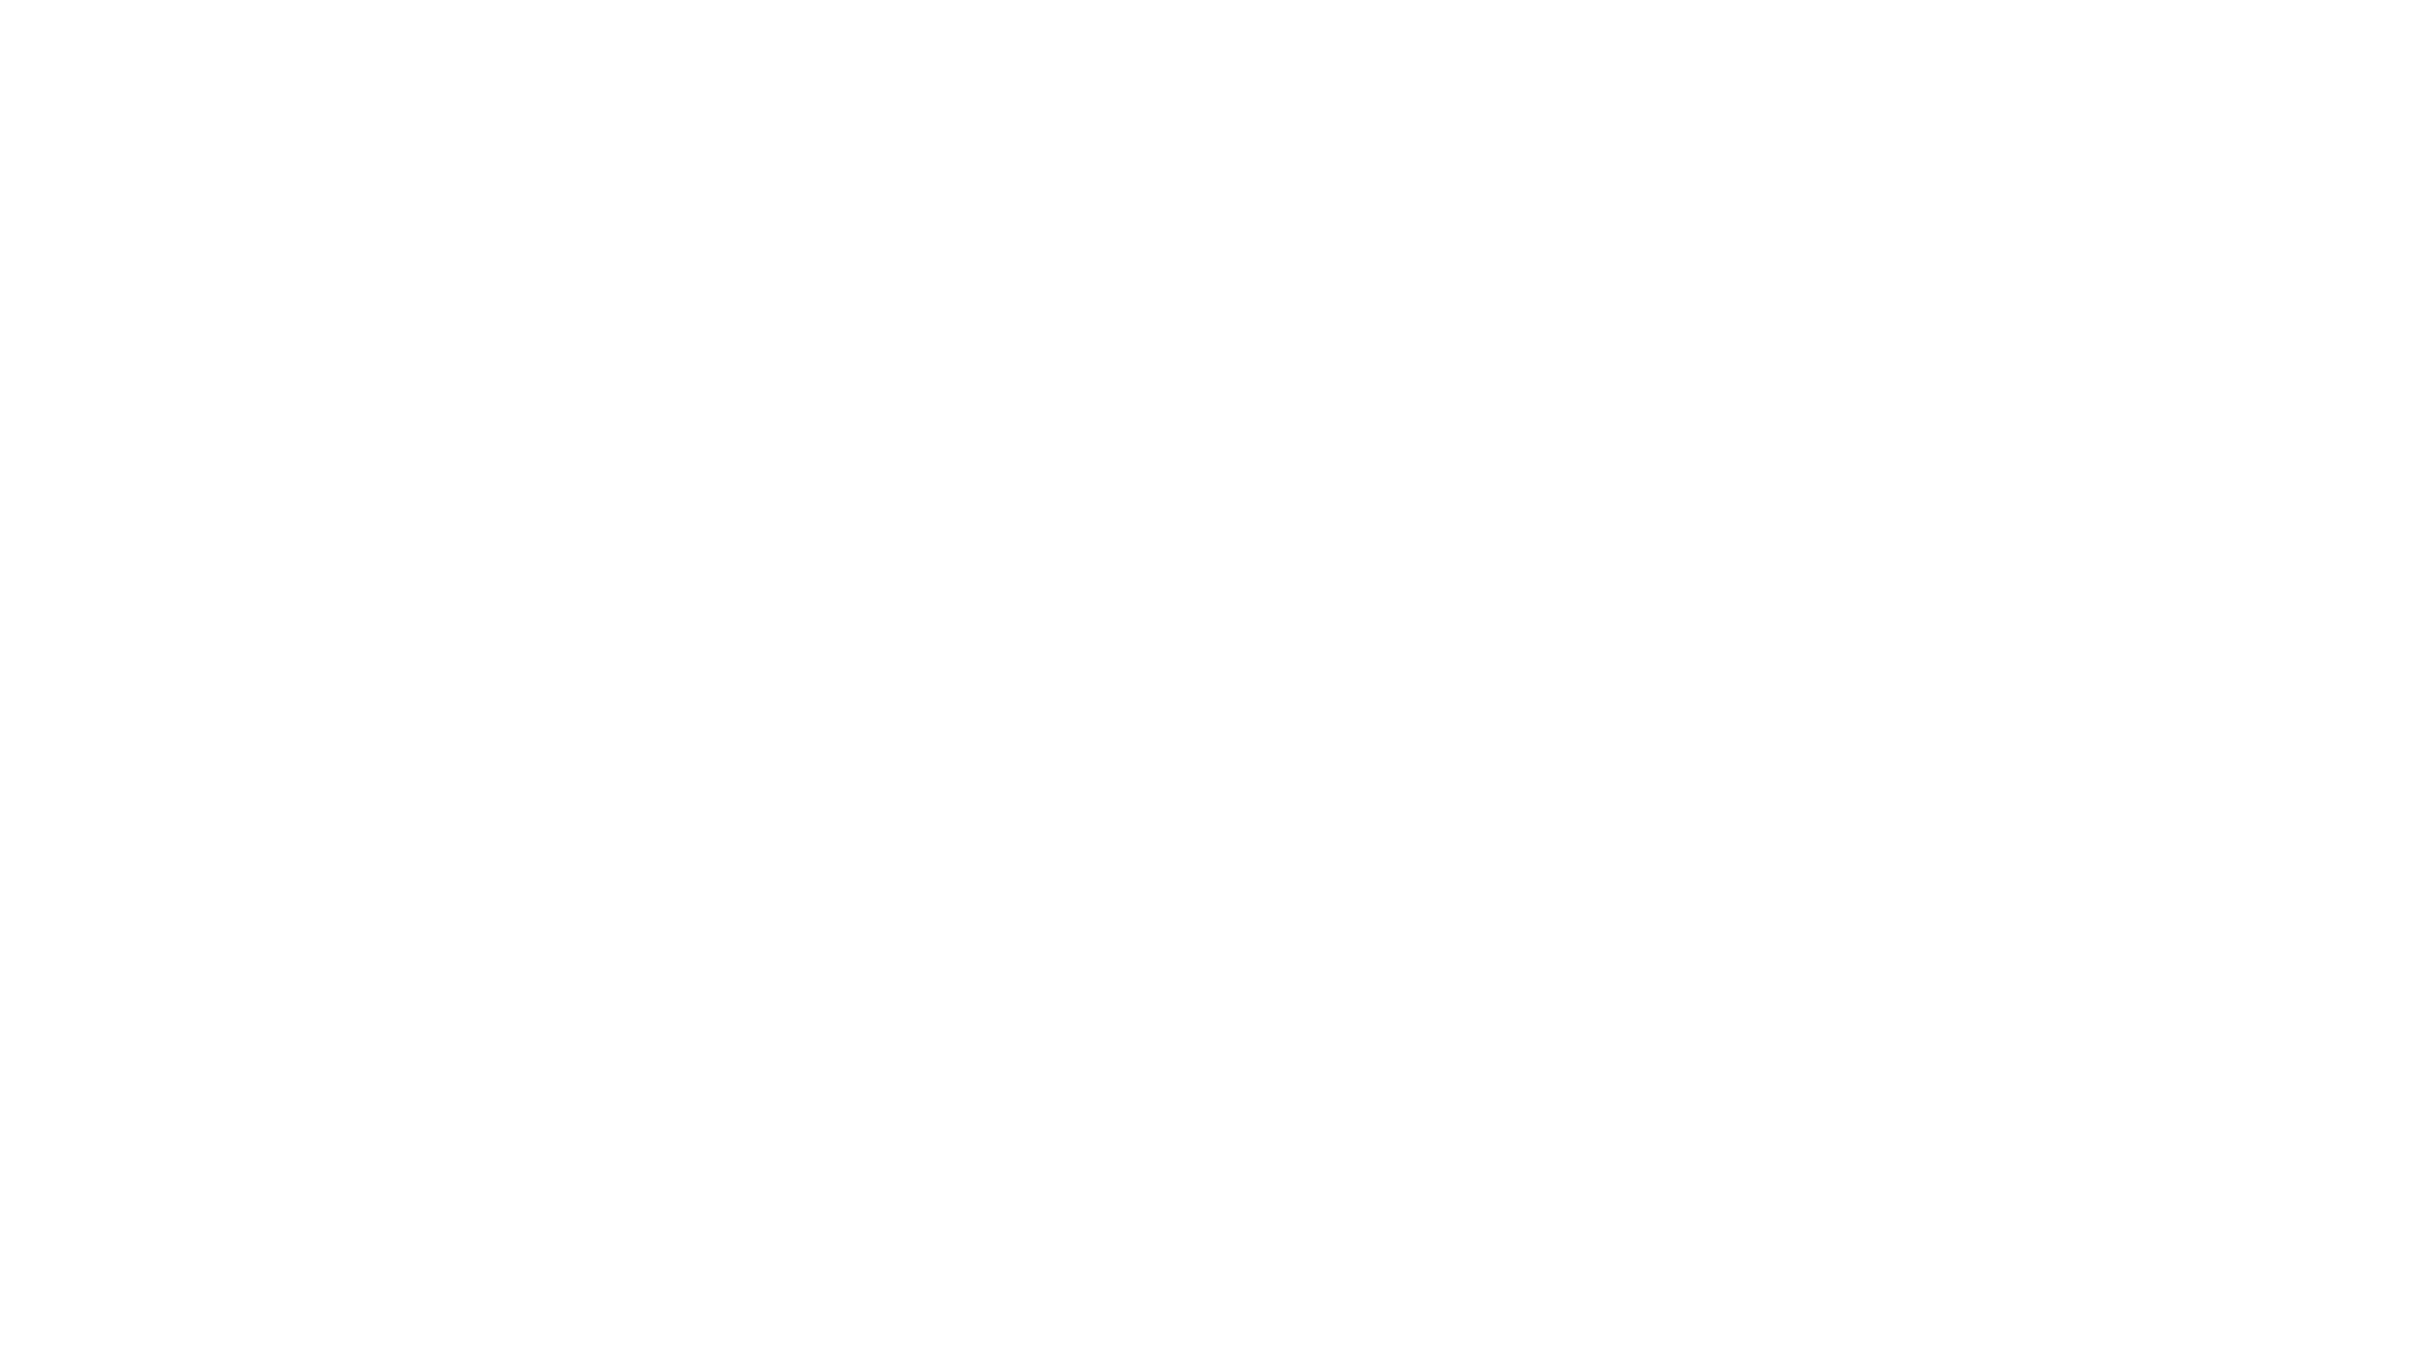 The HonkyTonk Party Band